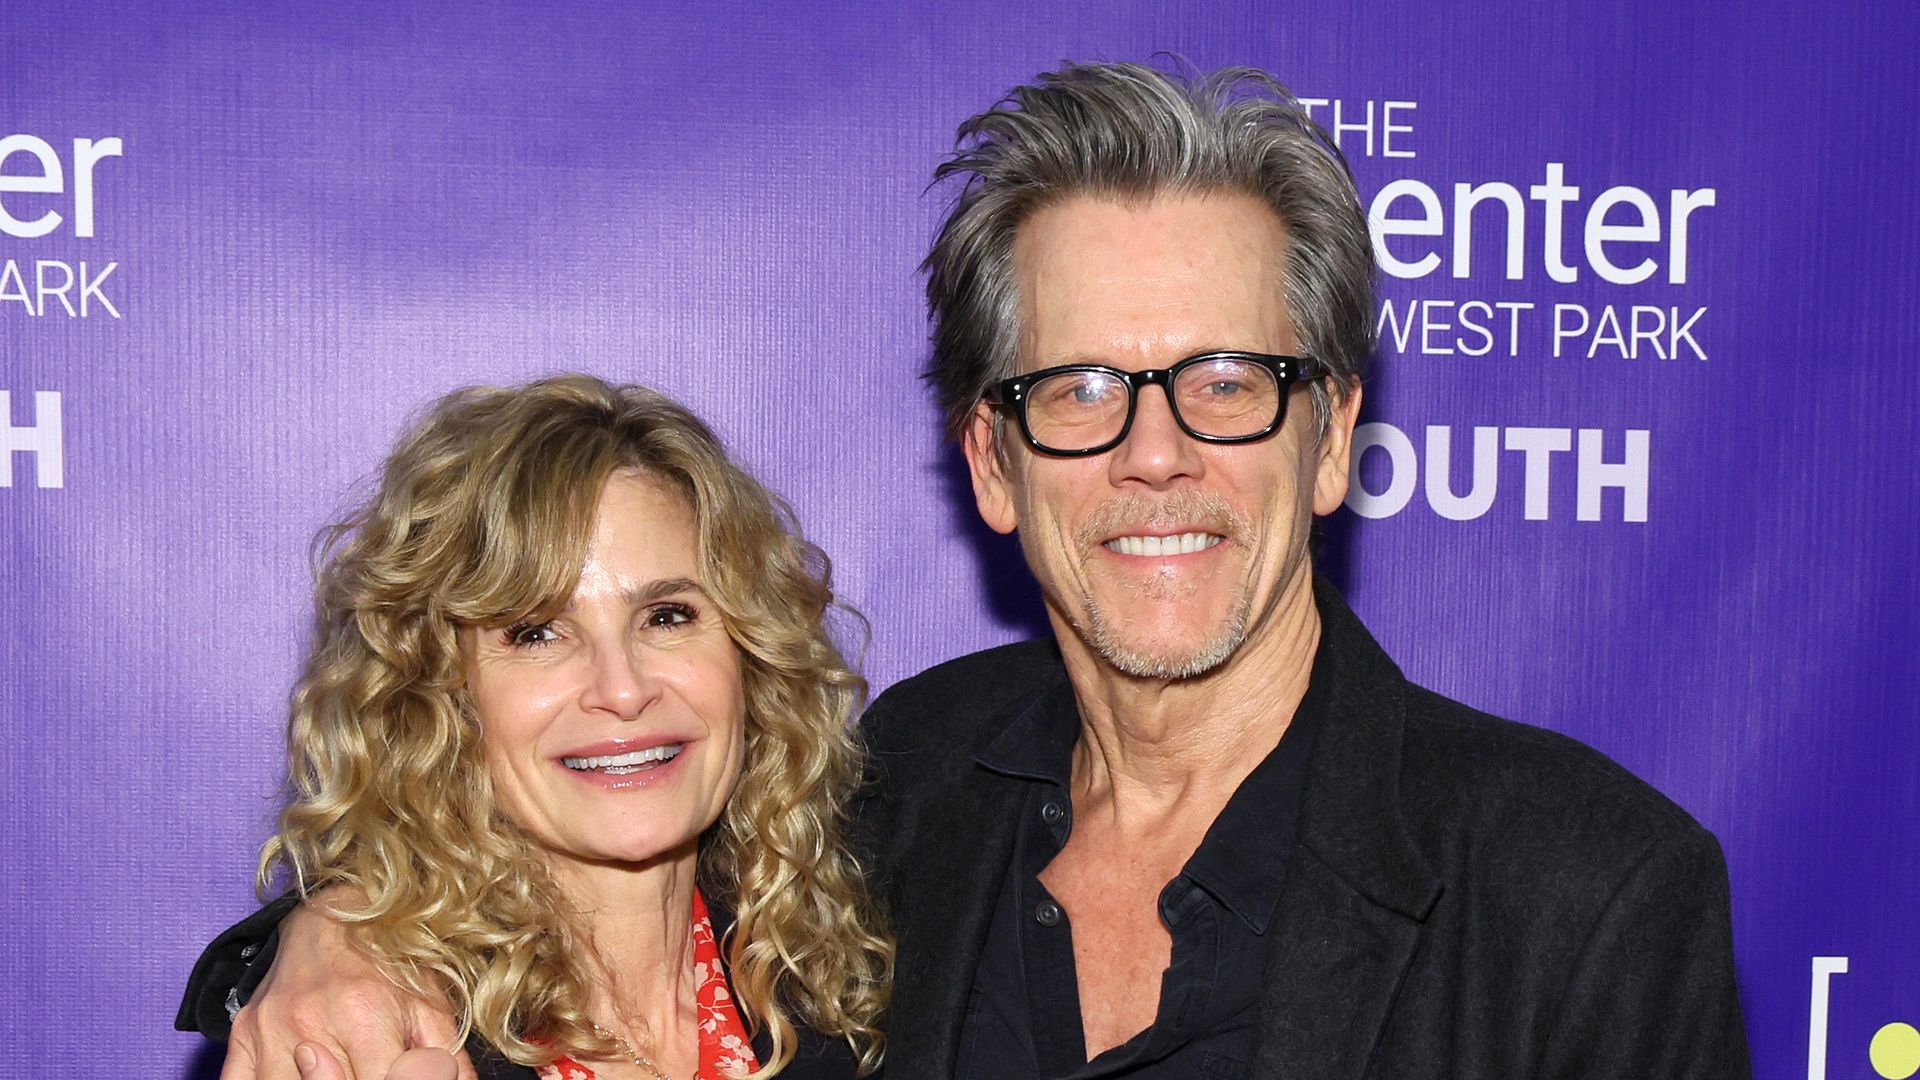 Kevin Bacon's steamy throwback photo with Kyra Sedgwick leaves fans saying the same thing